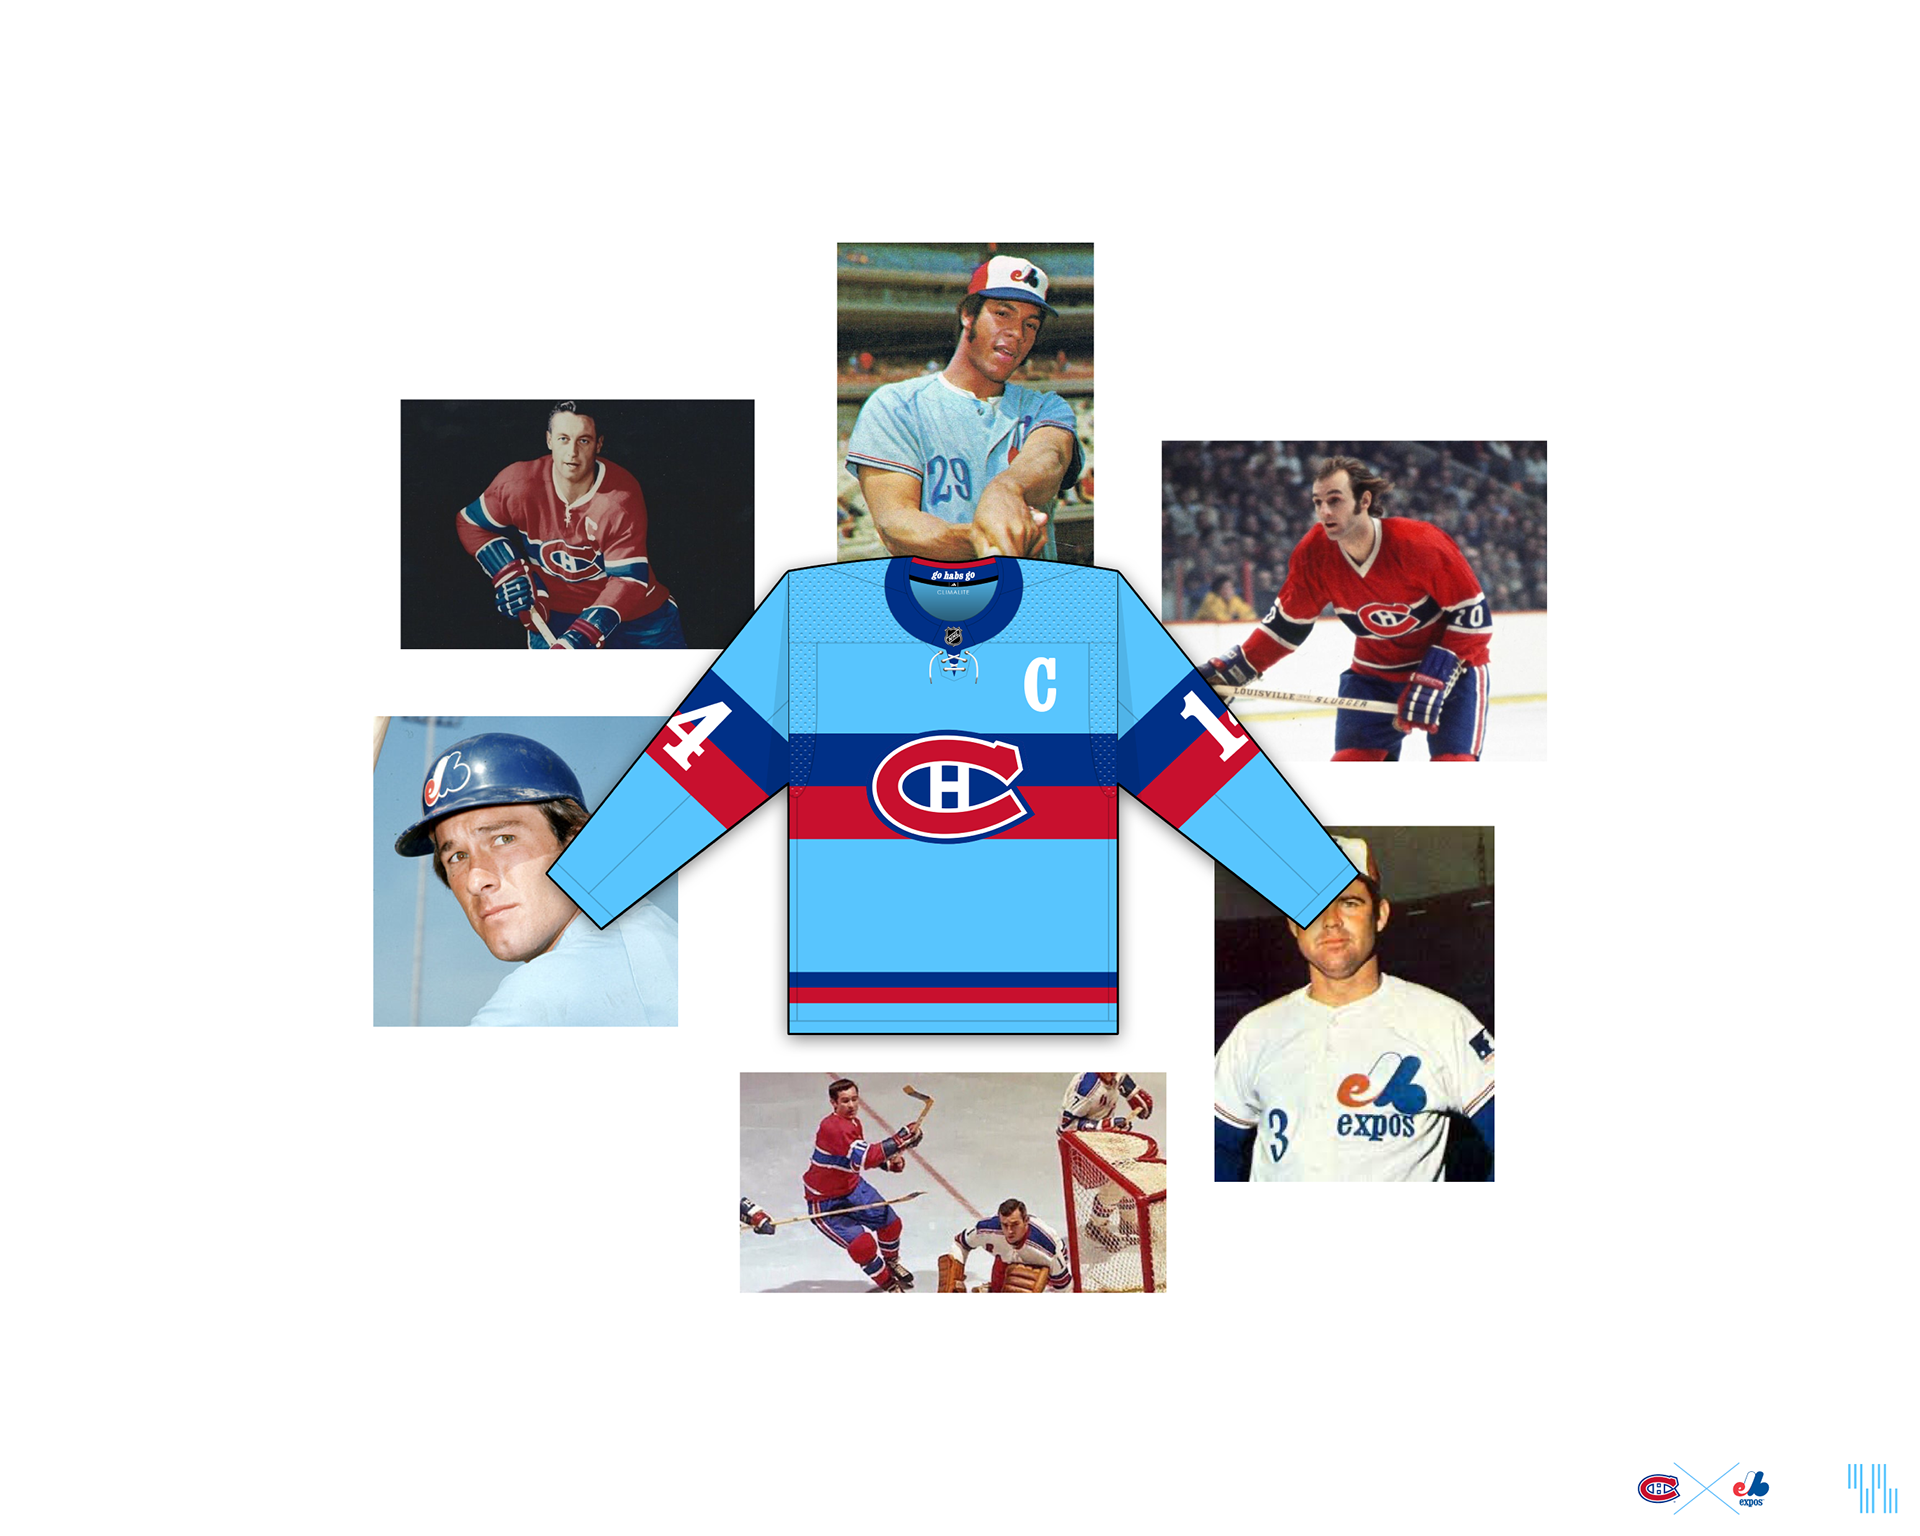 Montreal Canadiens - Expos Tribute Sweater - Concepts - Chris